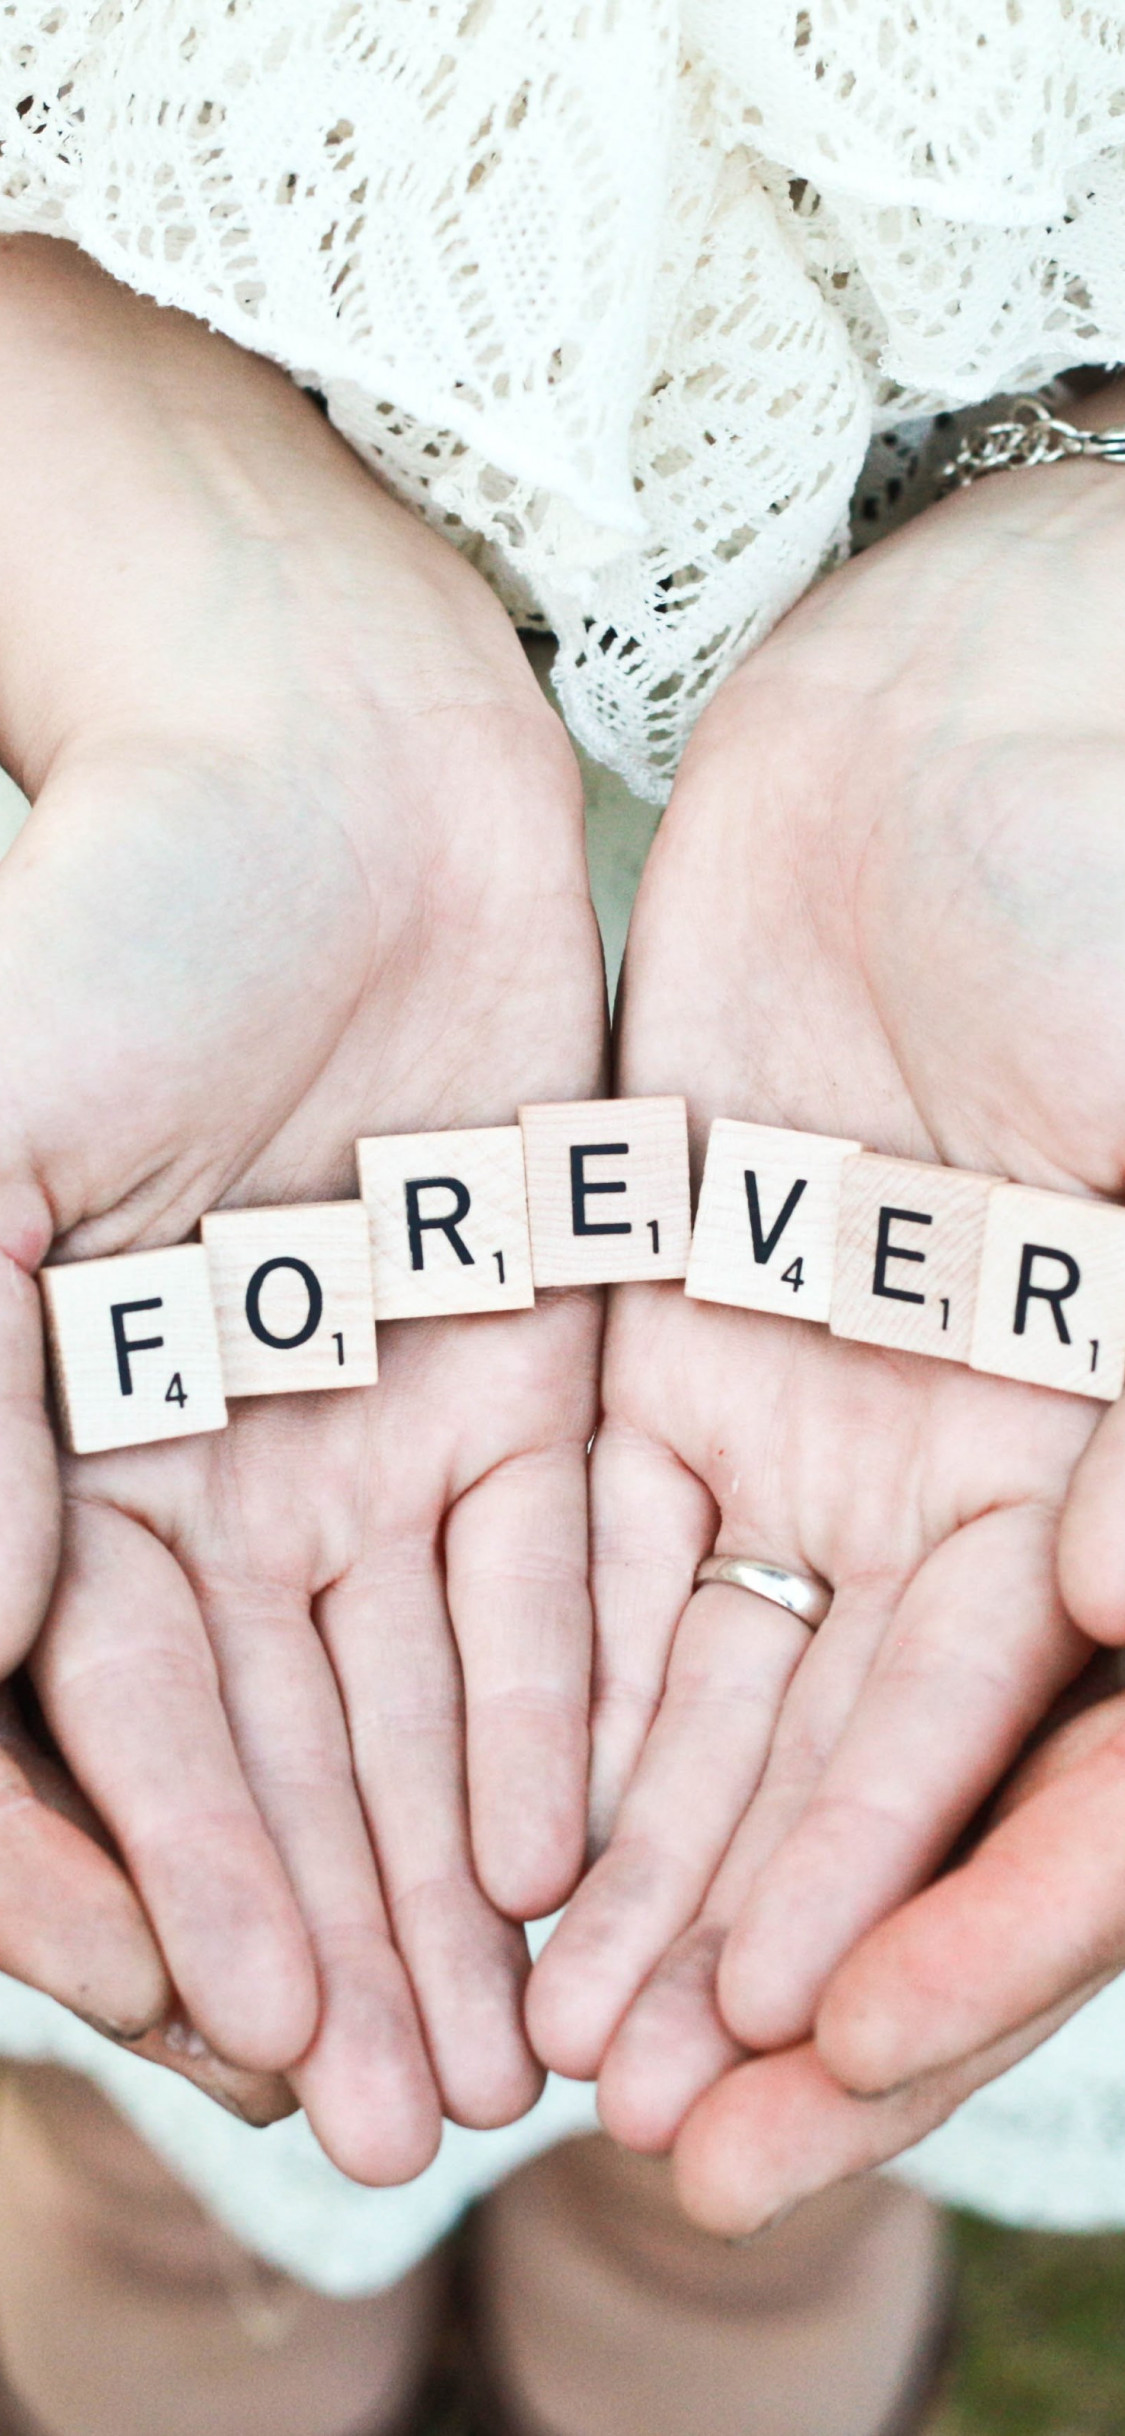 Forever message in their hands wallpaper 1125x2436